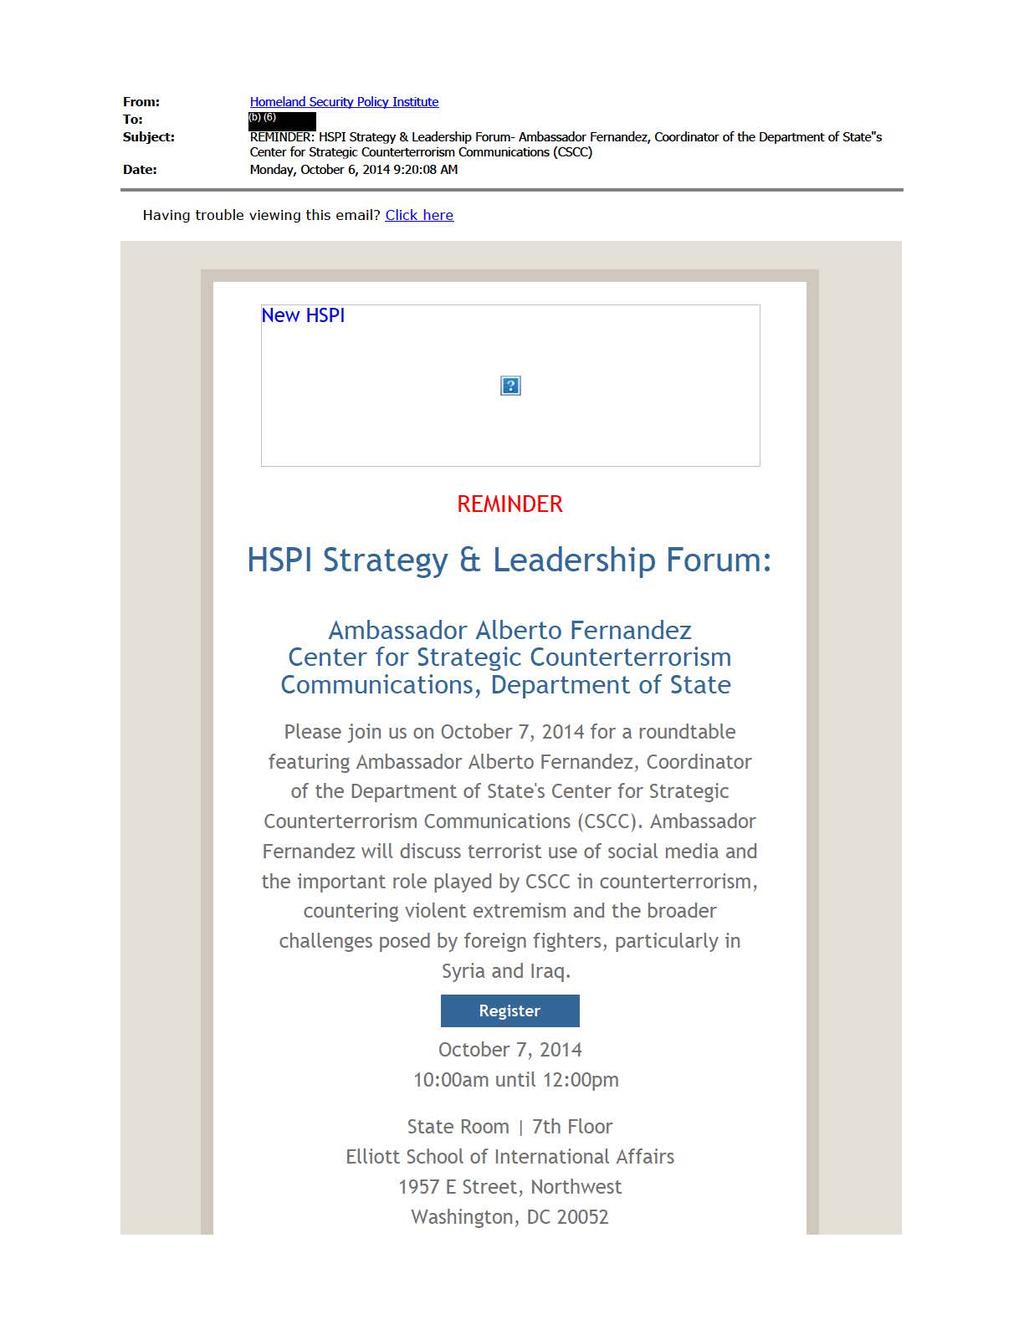 ... From: To: Subject: Date: Homeland Security Policy Institute REMI NDER: HSPI Strategy & Leadership Forum- Ambassador Fernandez, Coordinat or of the Department of State"s Cent er for Strategic